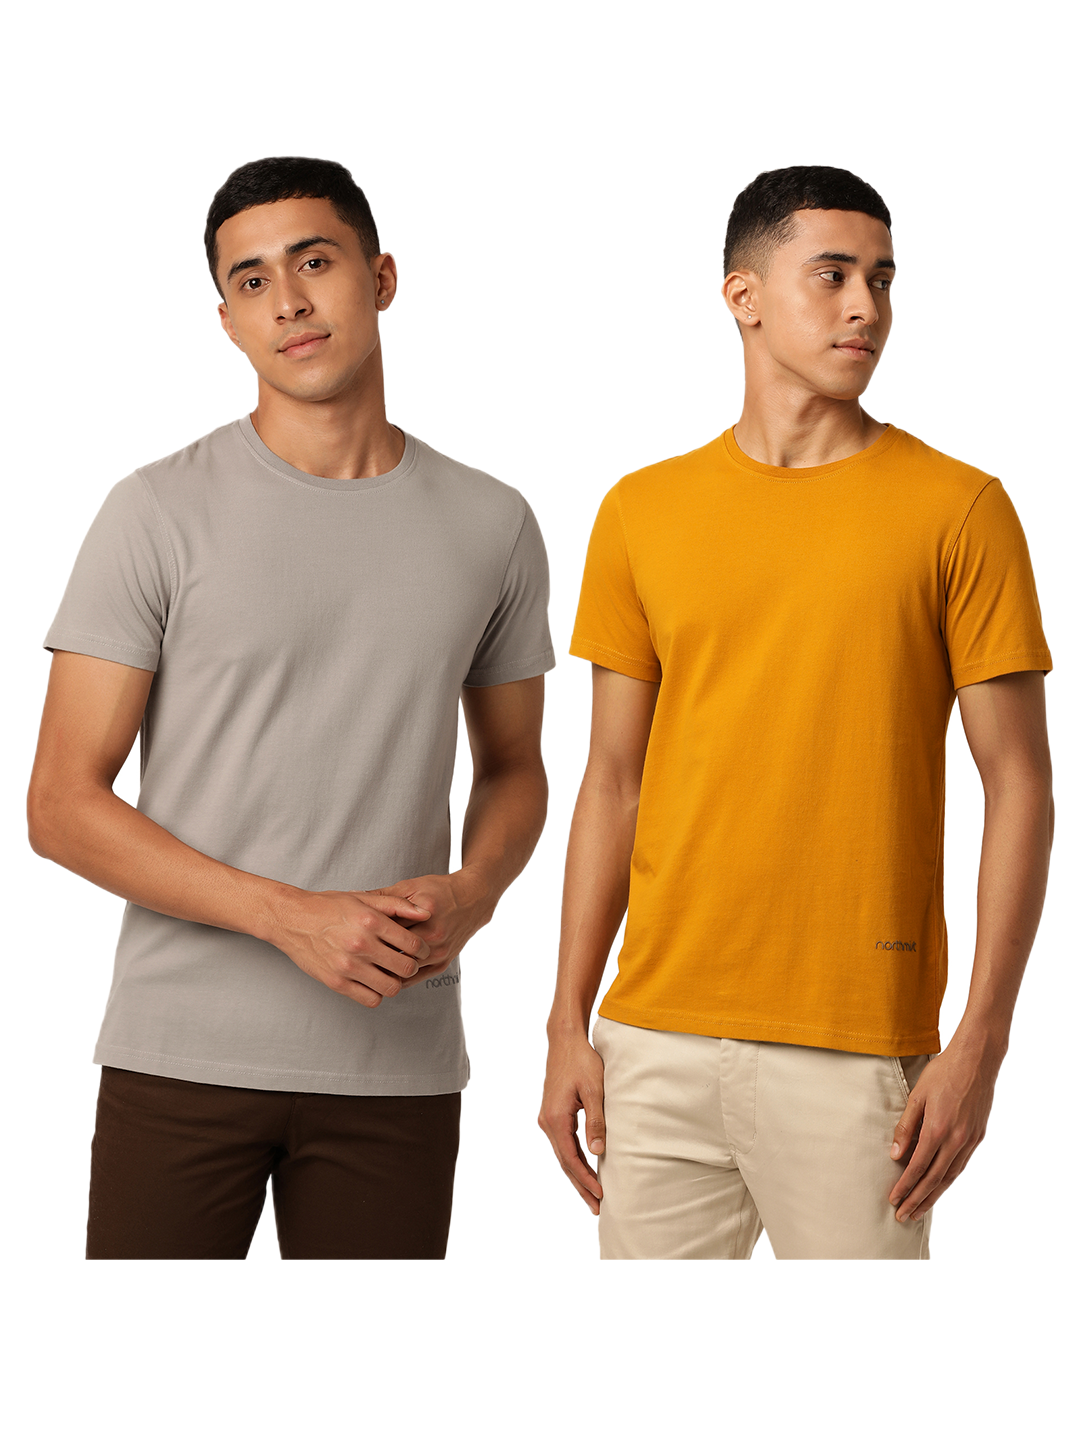 Men's Polo and Round Neck T-Shirts Combos